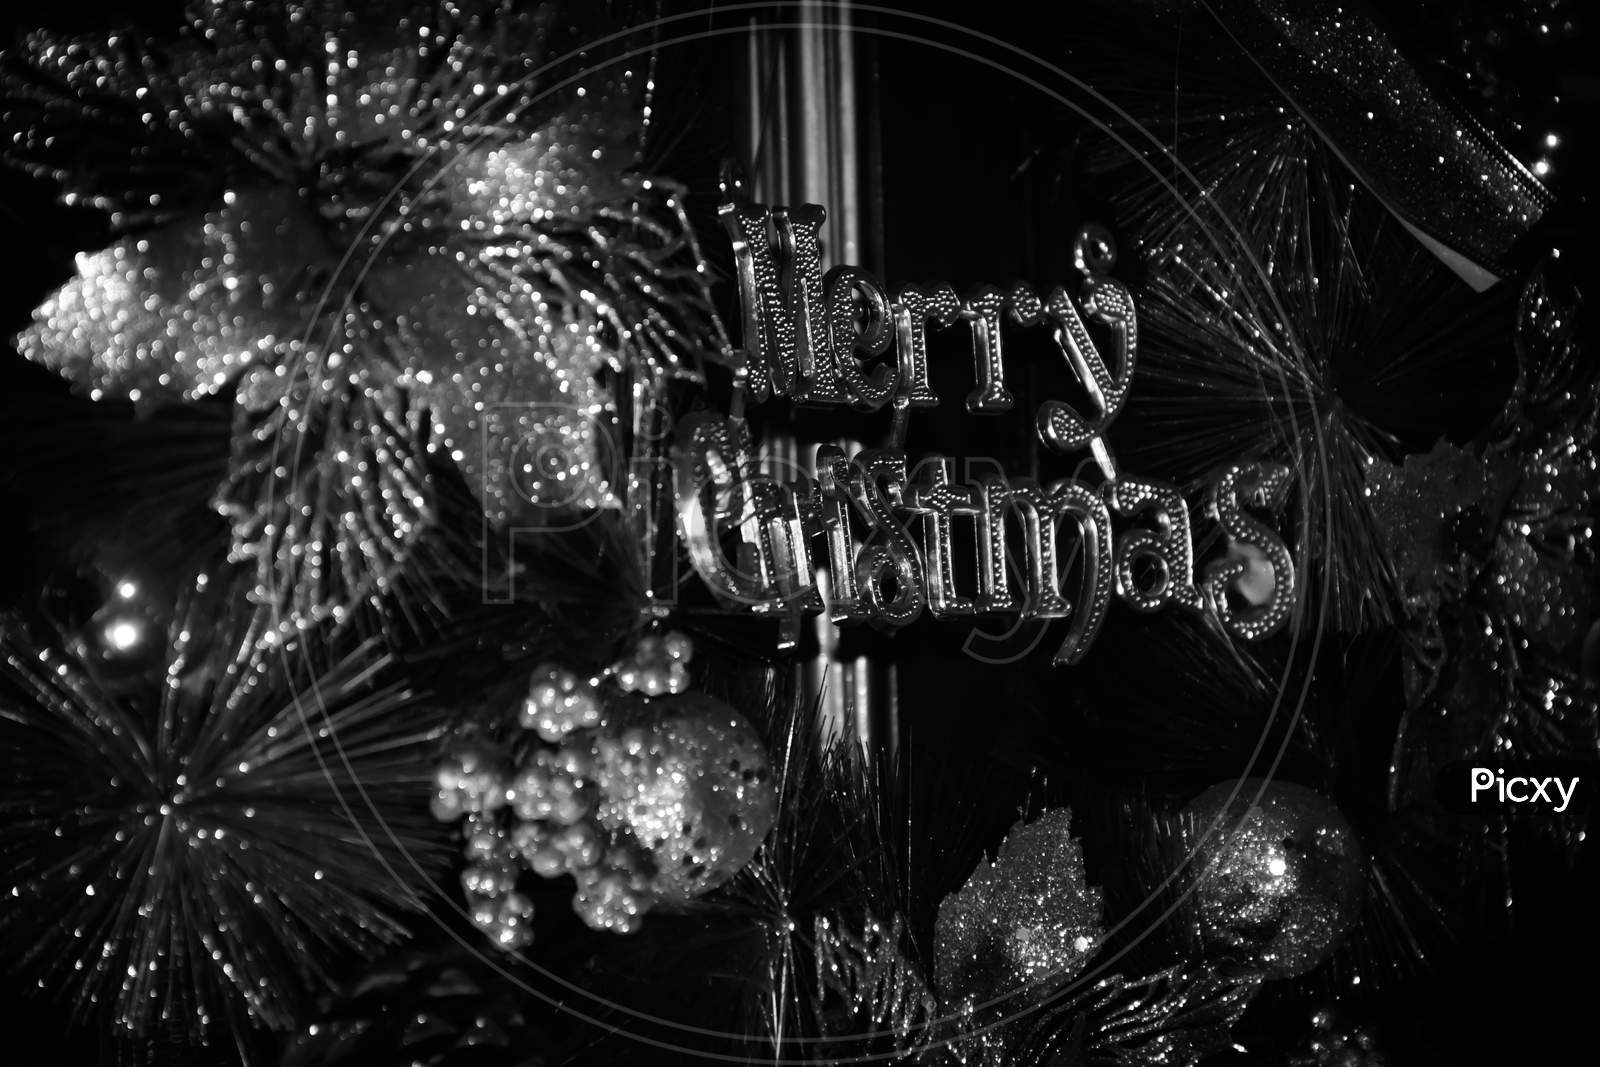 White And Black Photo Of A Decorative Christmas Wreath With Merry Christmas Text On Brown Wooden Door